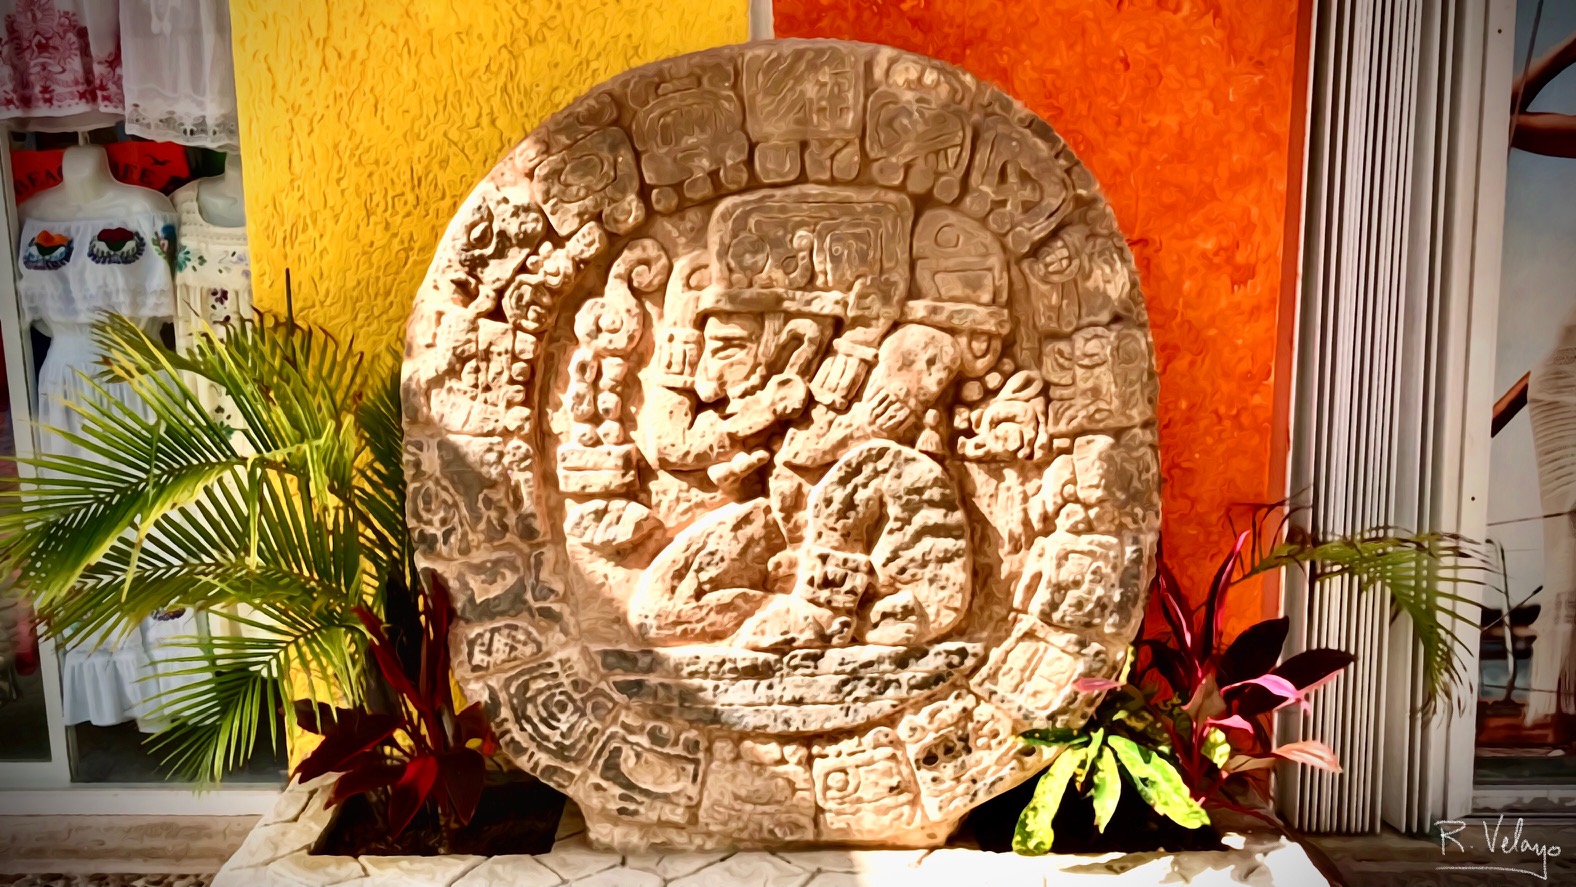 "MAYAN STONE CARVING ON DISPLAY AT COZUMEL’S CRUISE PORT" [Created: 3/14/2022]